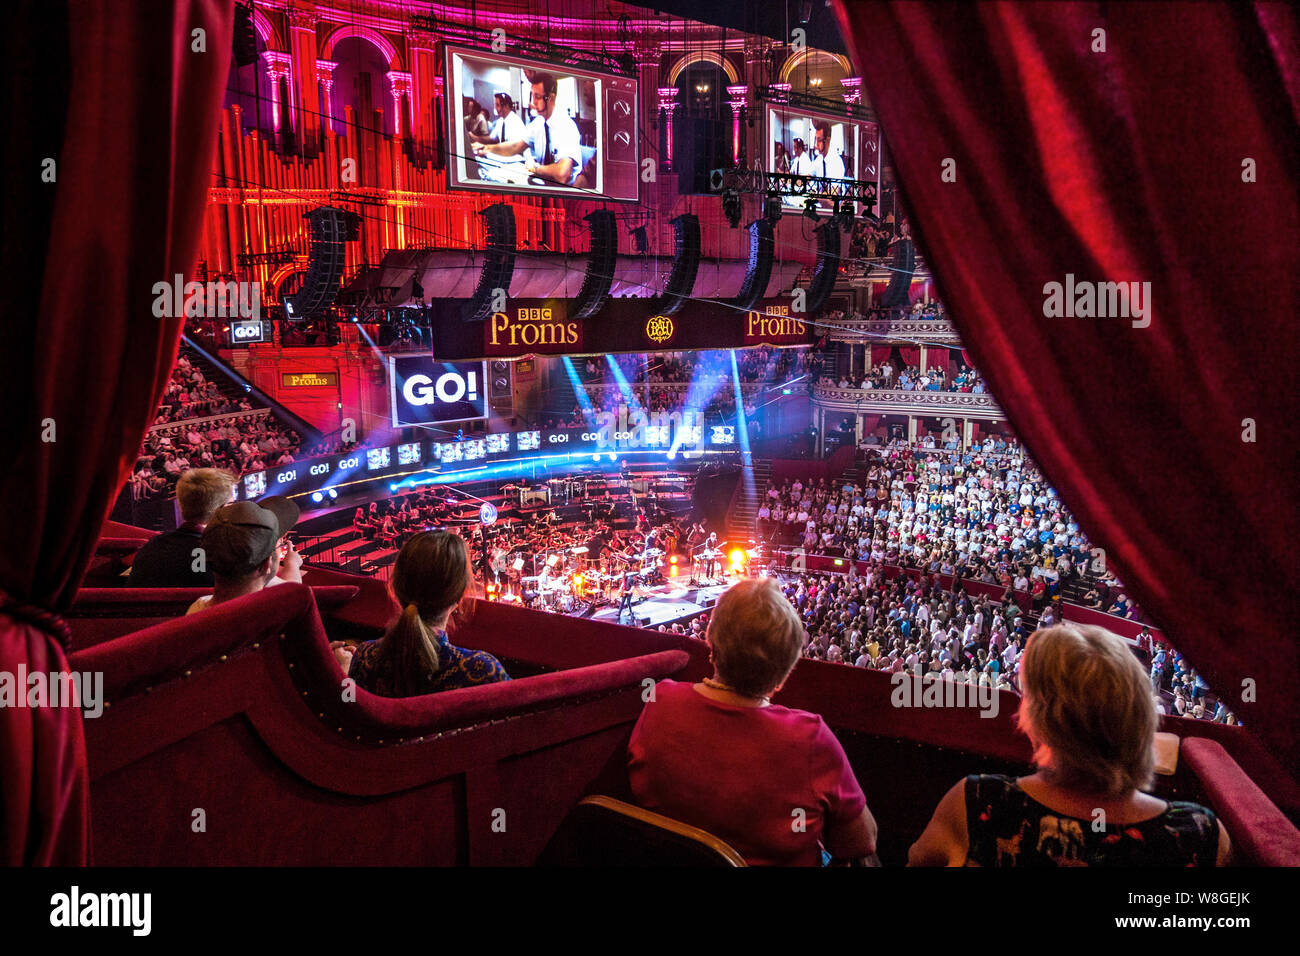 The Royal Albert Hall Audience BBC Proms performance interior viewed from luxury plush private box in auditorium with, sound & spectacular light effects with dramatic eclectic music performance by 'Public Service Broadcasting' and The Multi-Story Orchestra of a work entitled 'The Race For Space' an audio visual spectacular honouring mans achievements in space. Proms Promenade Concerts Royal Albert Hall Kensington London UK Stock Photo